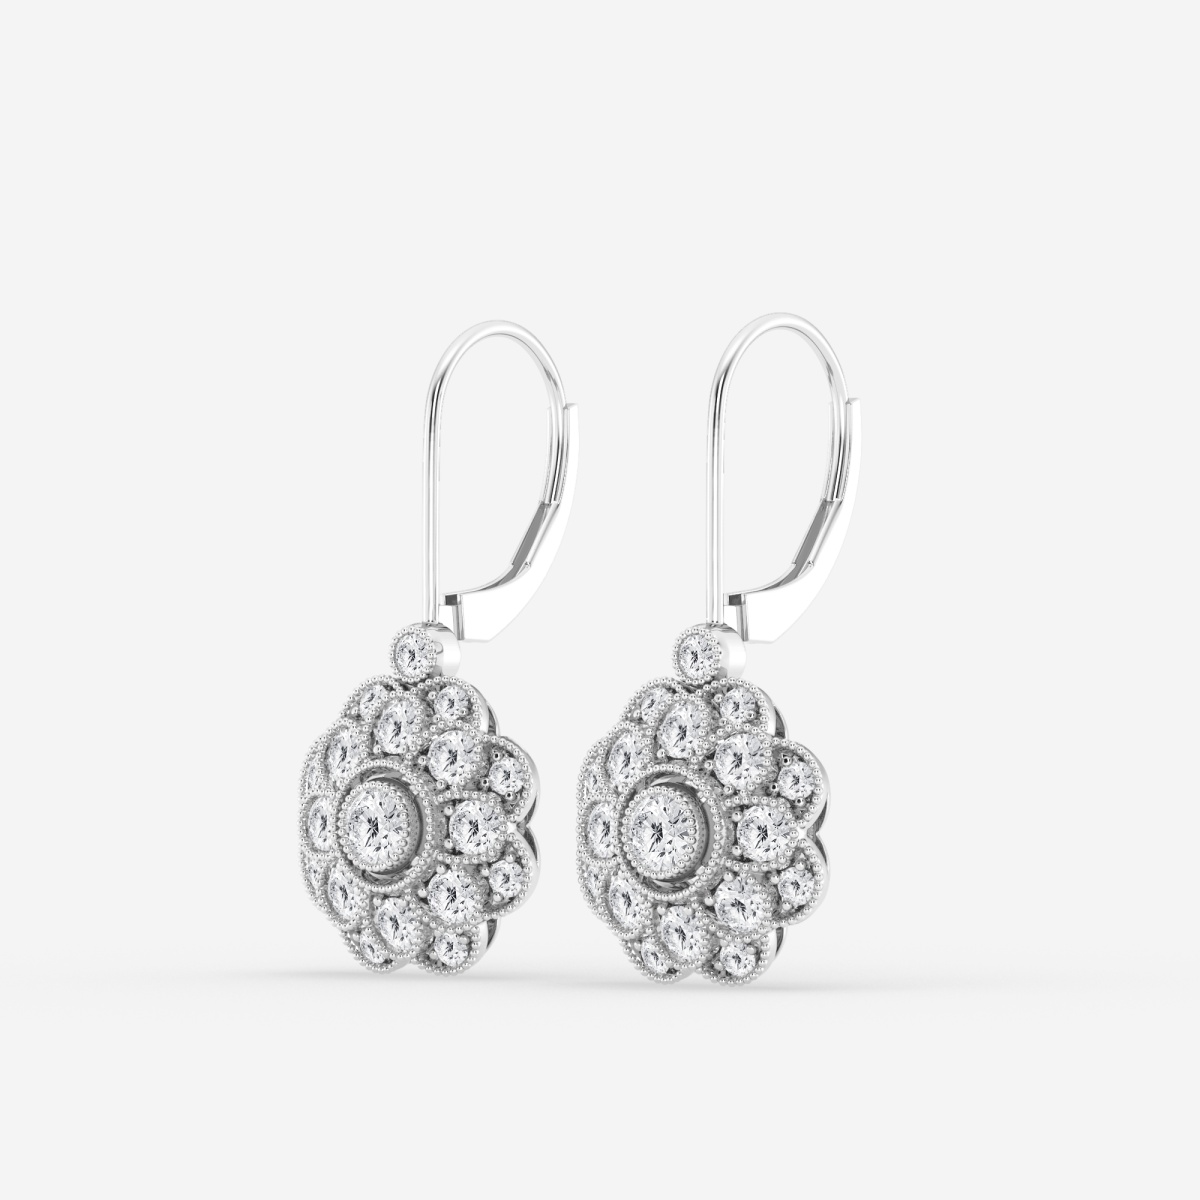 Additional Image 1 for  1 1/2 ctw Round Lab Grown Diamond Vintage Floral Milgrain Fashion Earrings